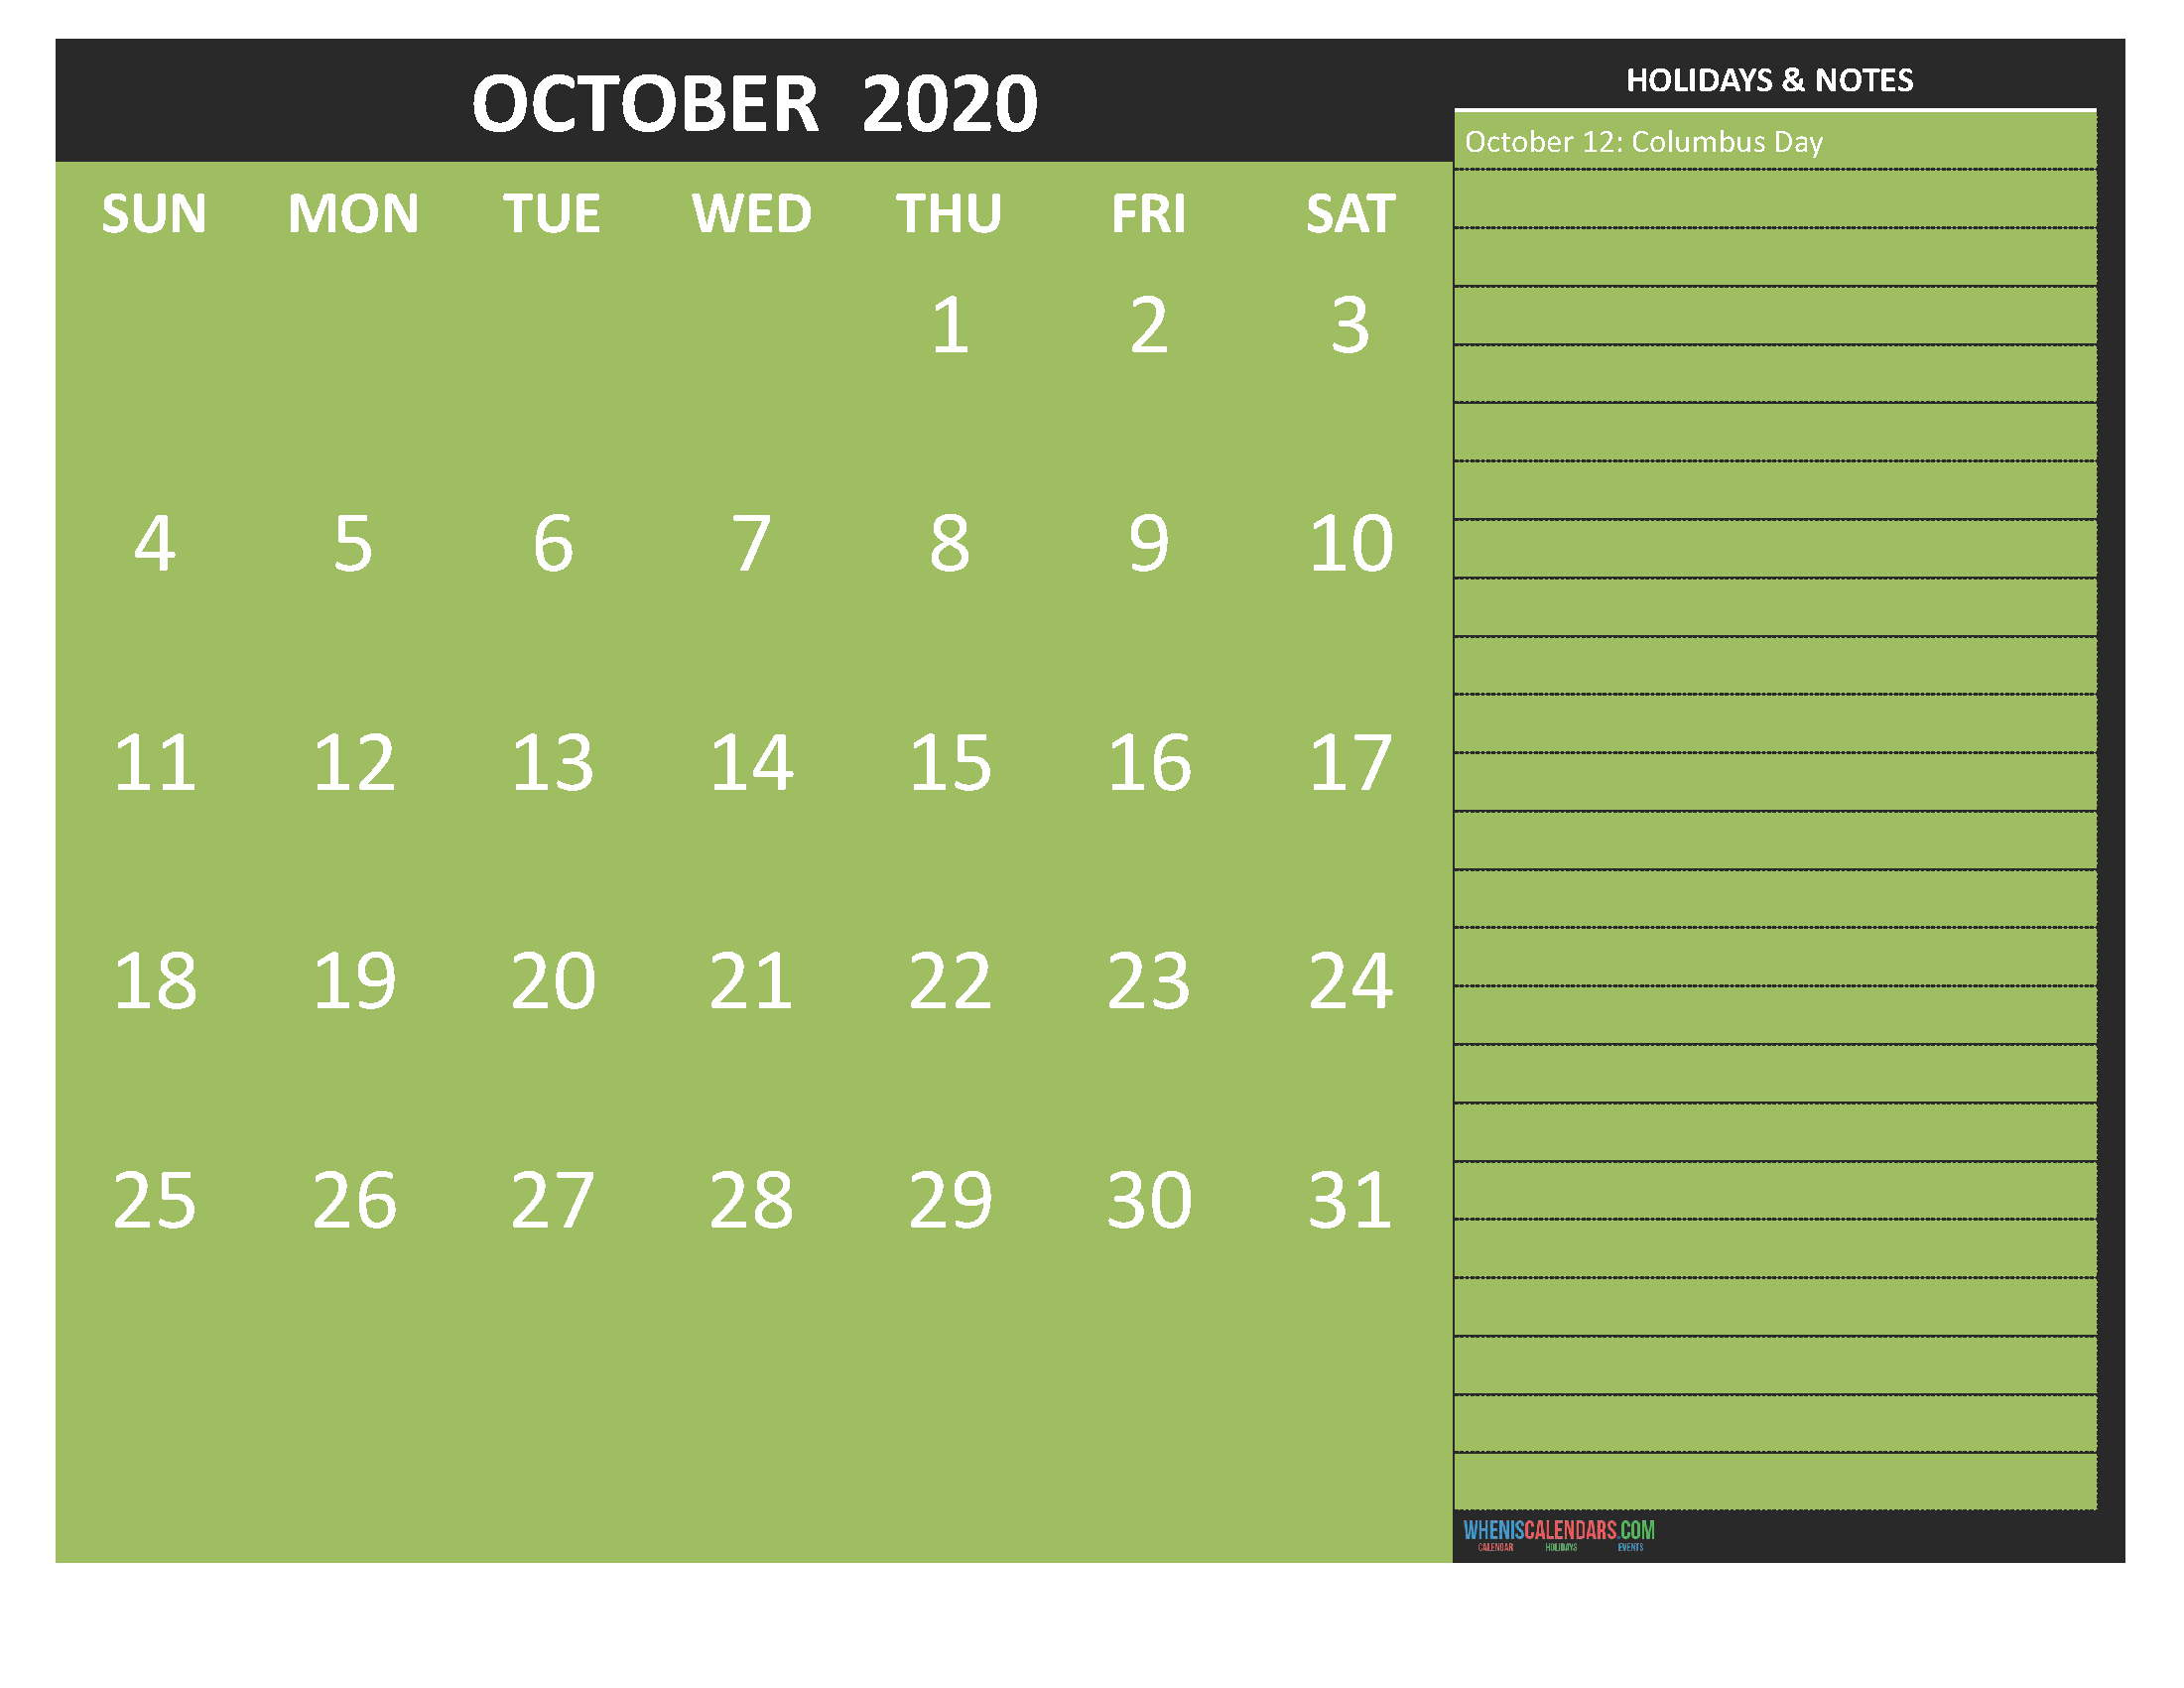 October 2020 Calendar with Holidays Free Printable by Word